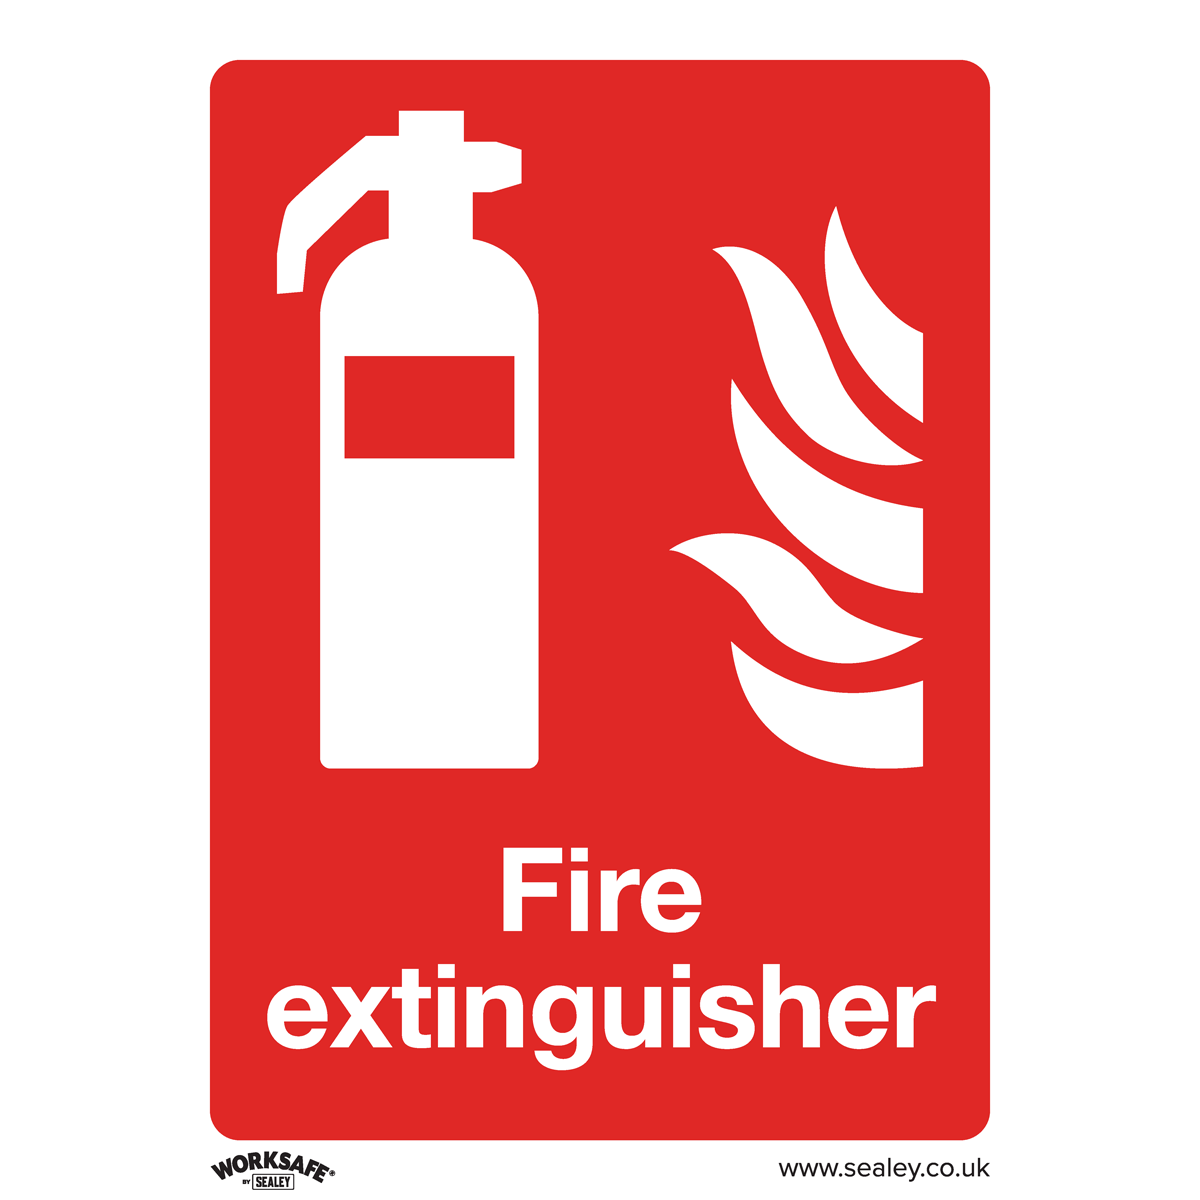 Sealey Prohibition Safety Sign - Fire Extinguisher - Self-Adhesive Vinyl